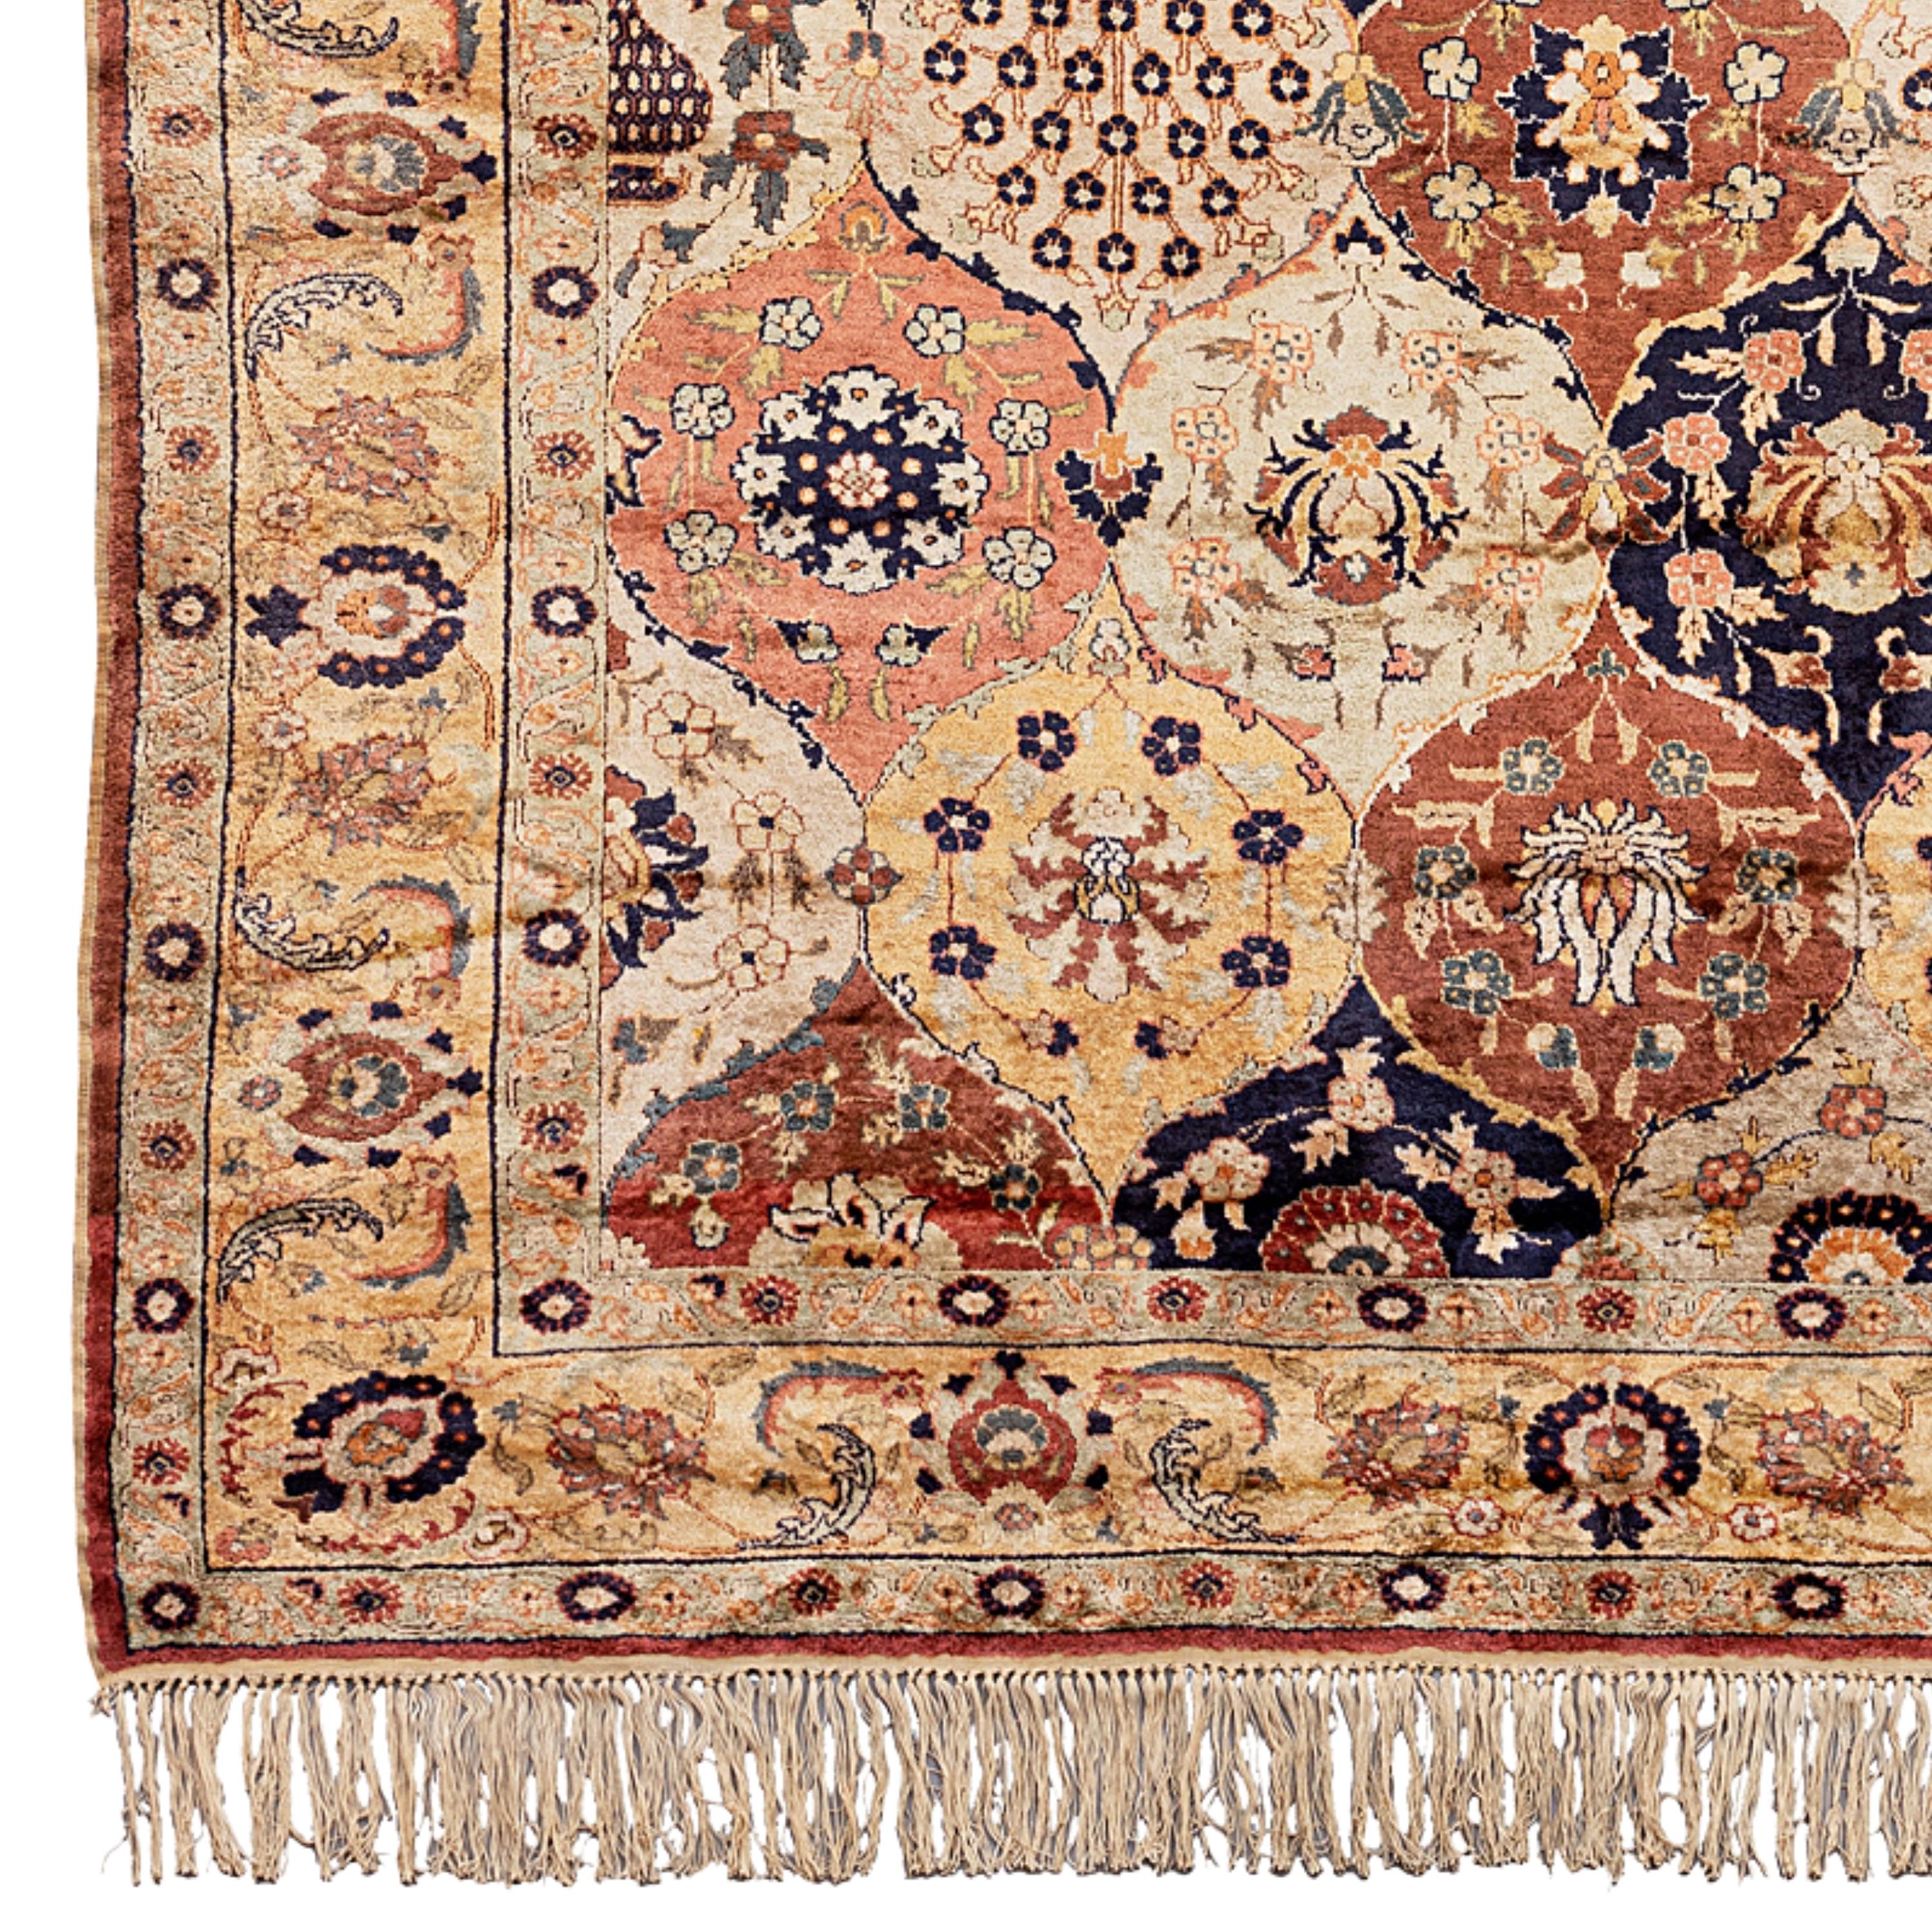 20th Century Kayseri Flosh Rug
Size: 195x280 cm

This impressive 20th century Anatolian Kayseri Carpet is a masterpiece reflecting the elegant and sophisticated craftsmanship of a historical period.

Rich Patterns: The carpet is decorated with